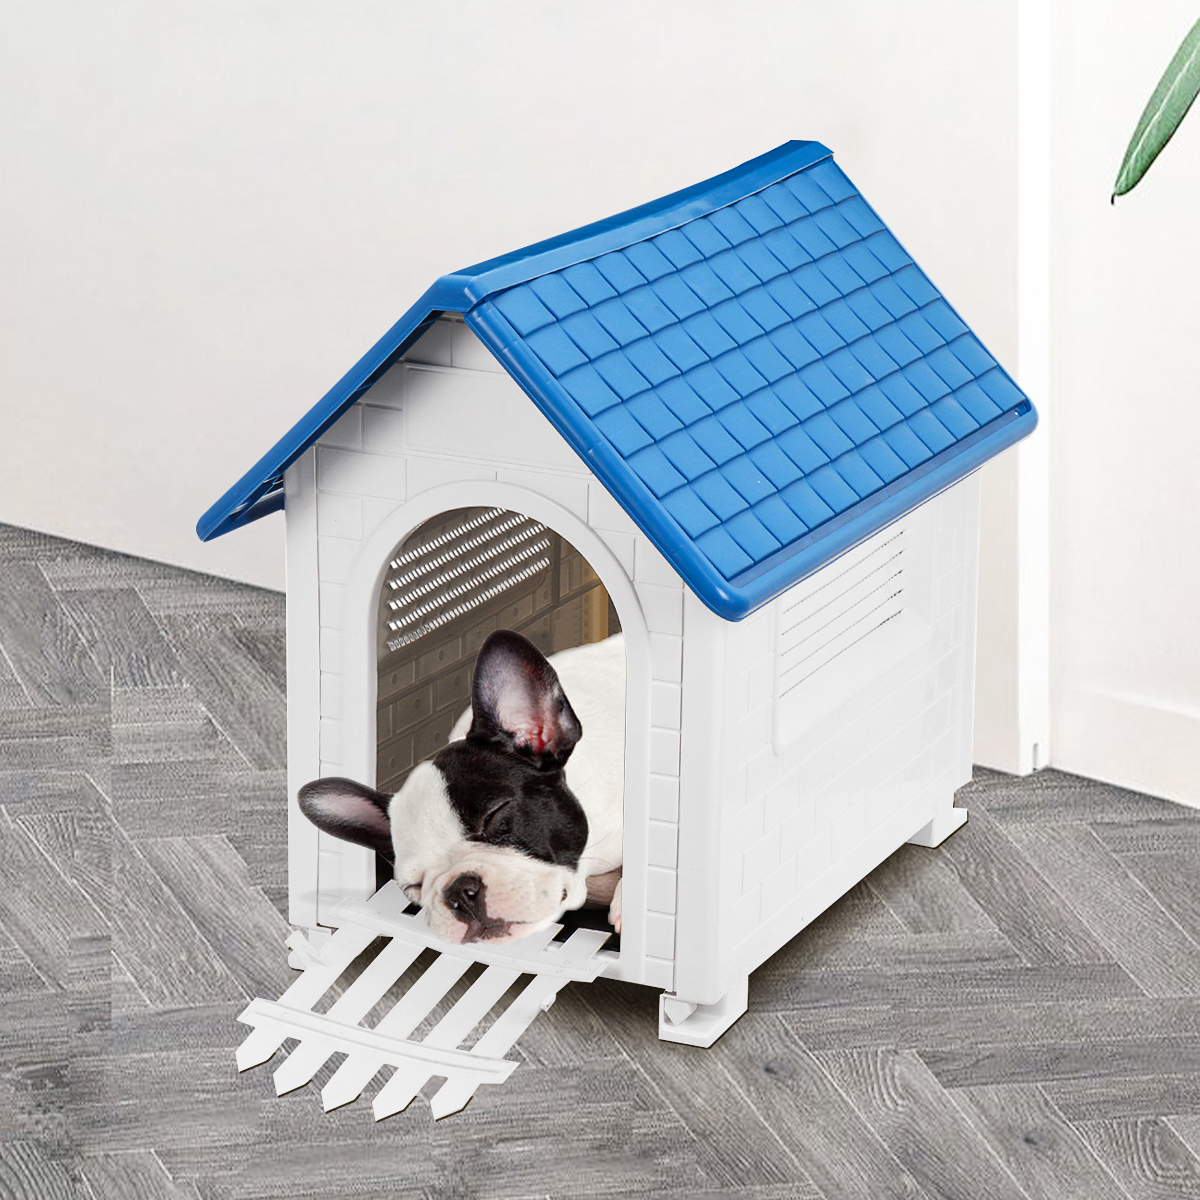 Foldable-Plastic-Pets-Dogs-Houses-Cages-Small-Outdoors-Waterproof-Warm-Removable-Washable-With-Kenne-1849921-8